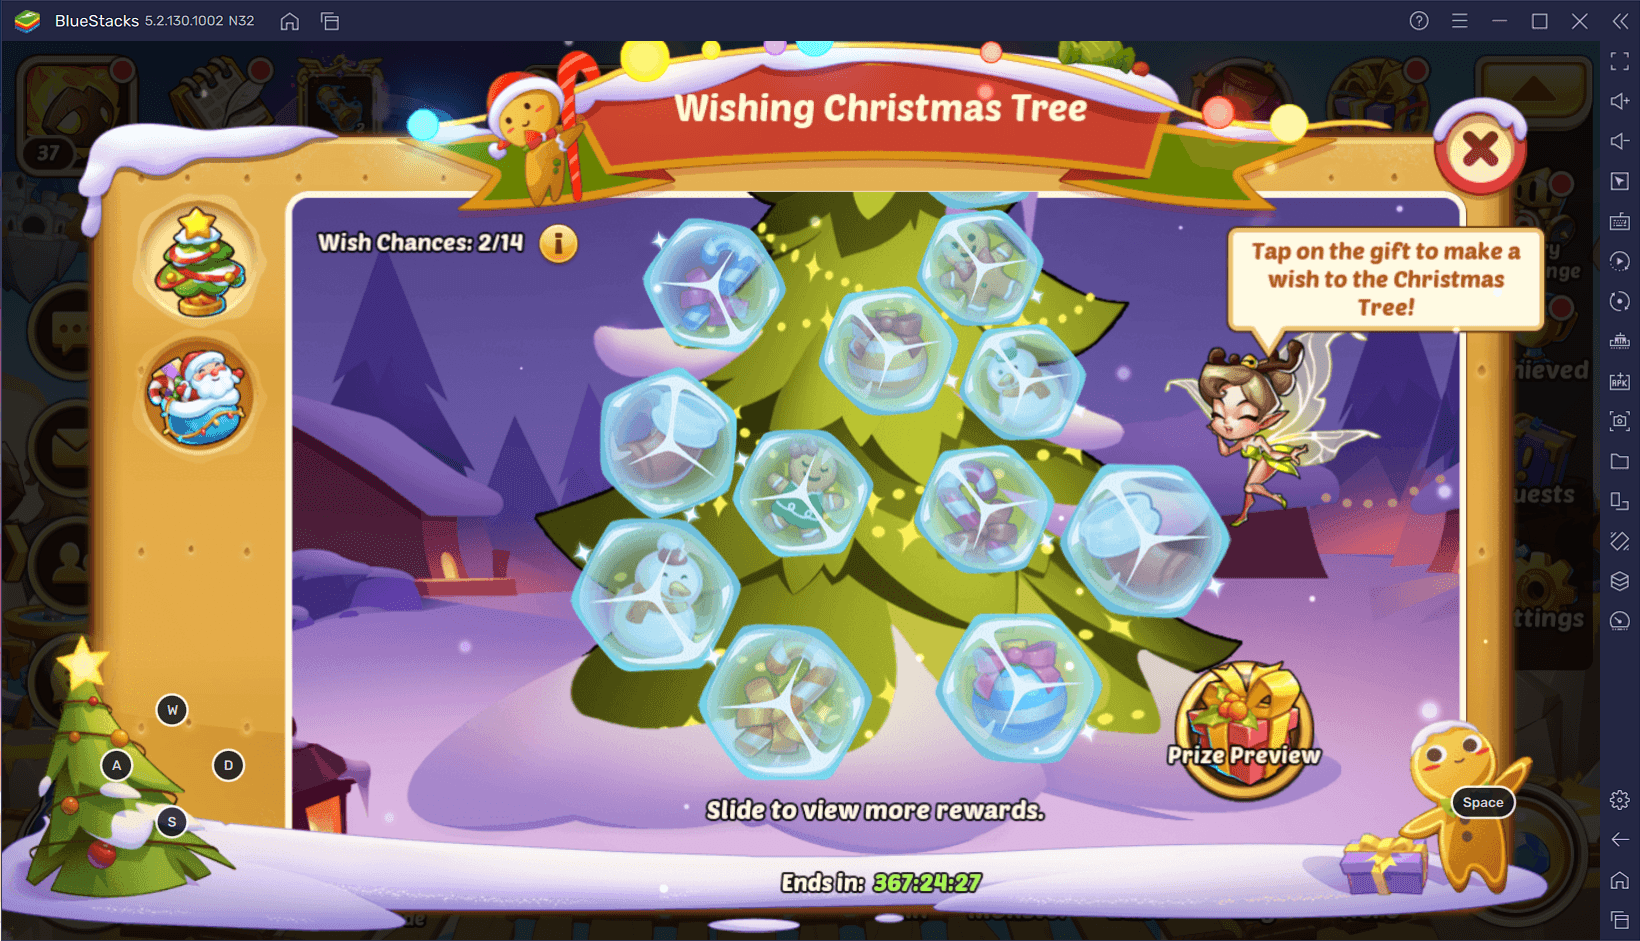 Idle Heroes: Christmas Arrives in the Idle Continent!